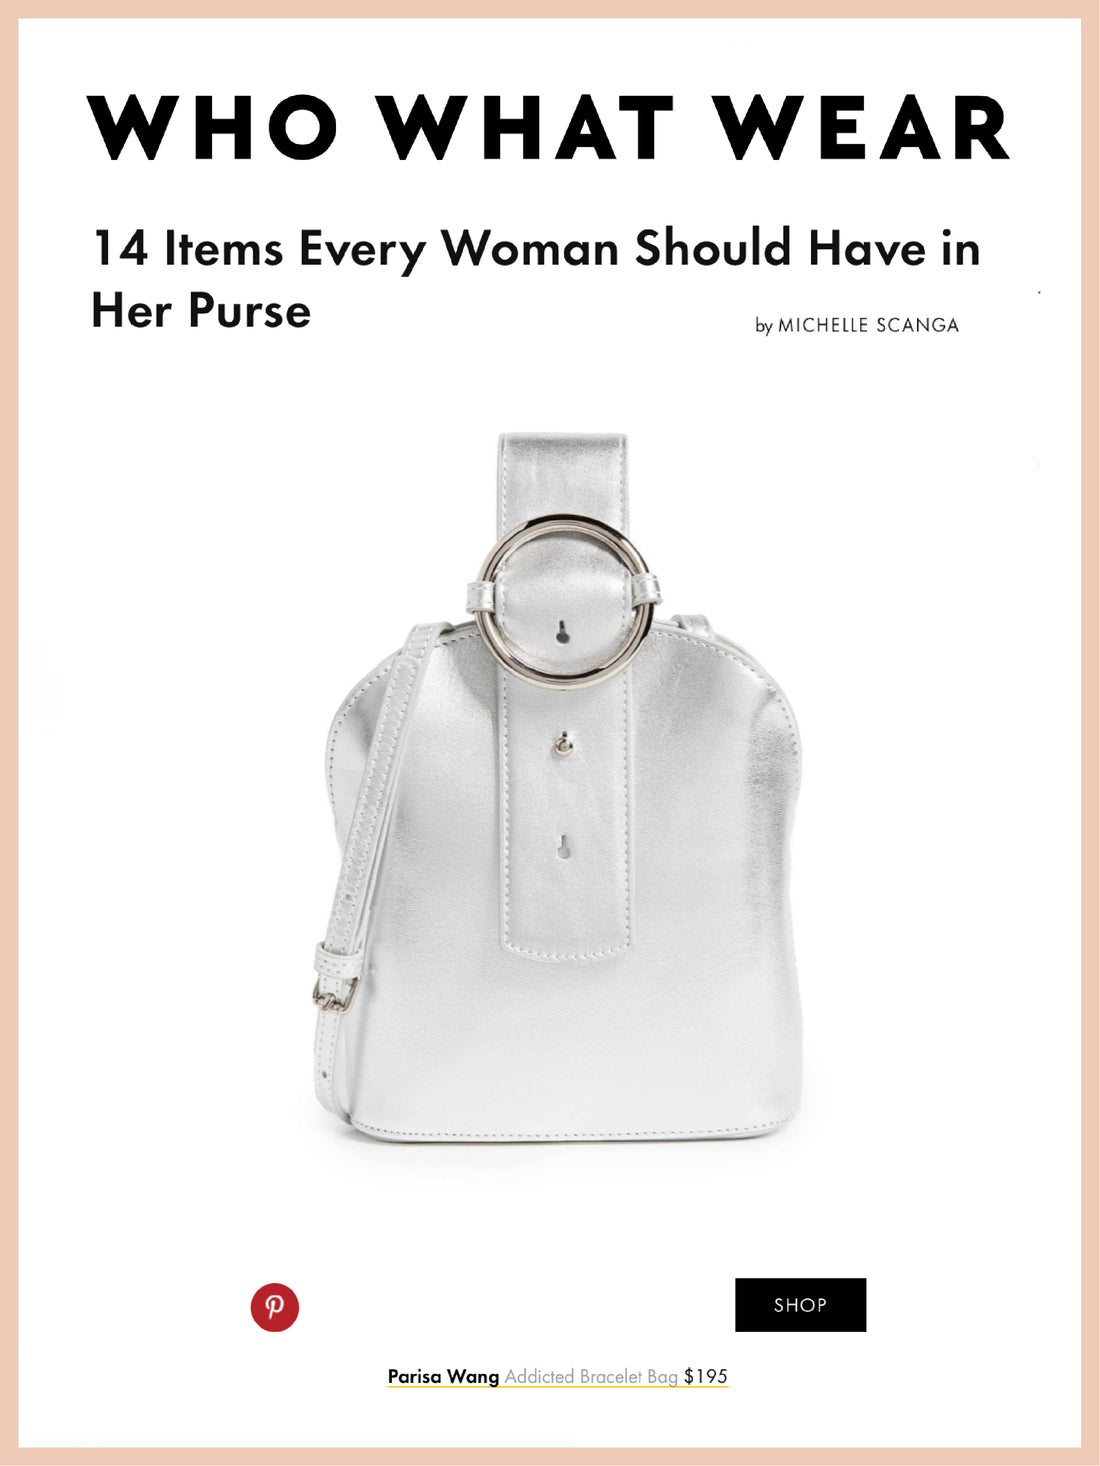 WHO WHAT WEAR, 14 Items Every Woman Should Have in Her Purse